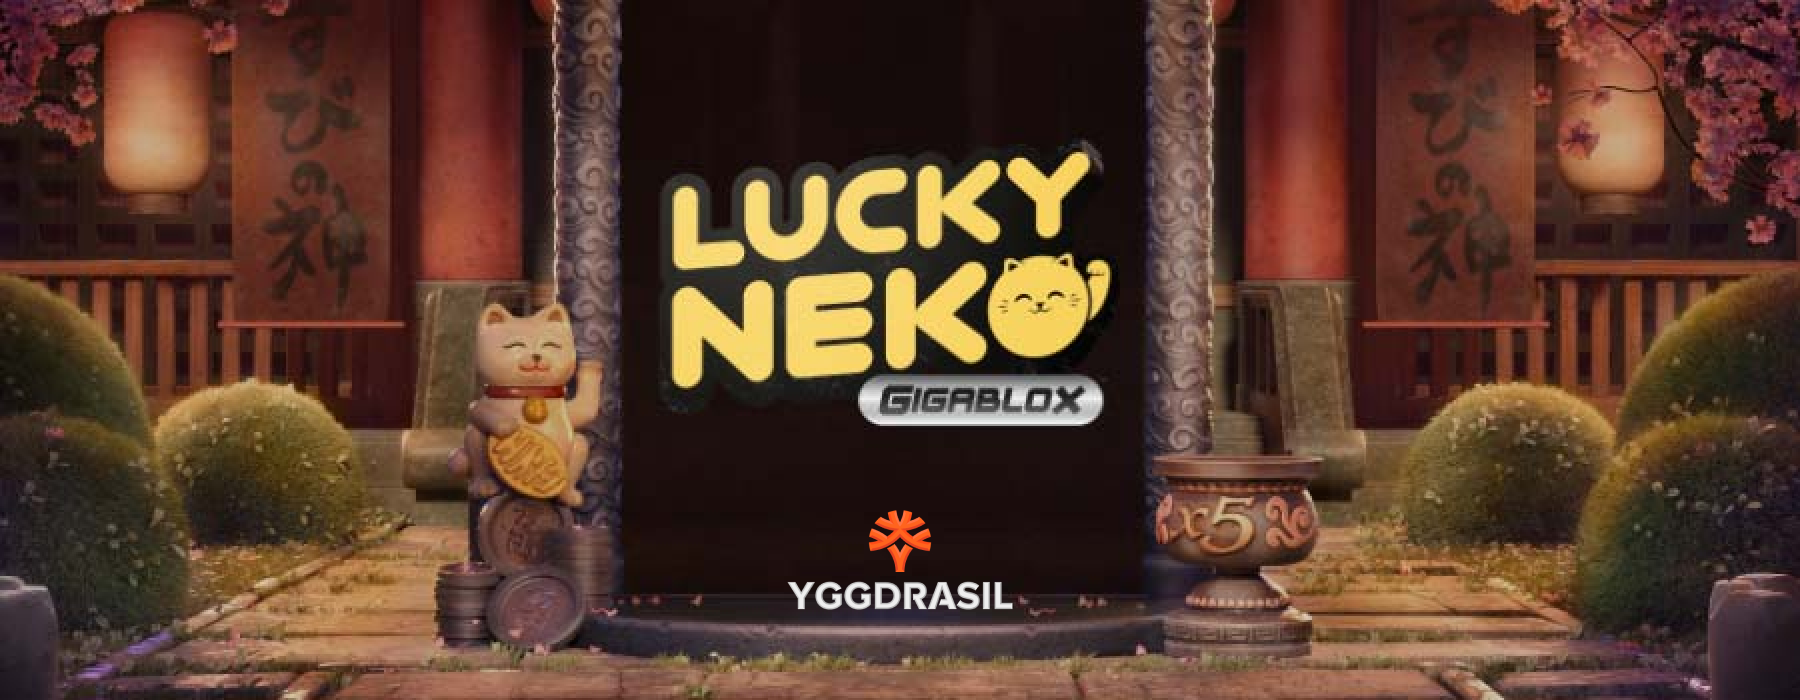 Lucky Neko by Yggdrasil: A Detailed Slot Review & Guide